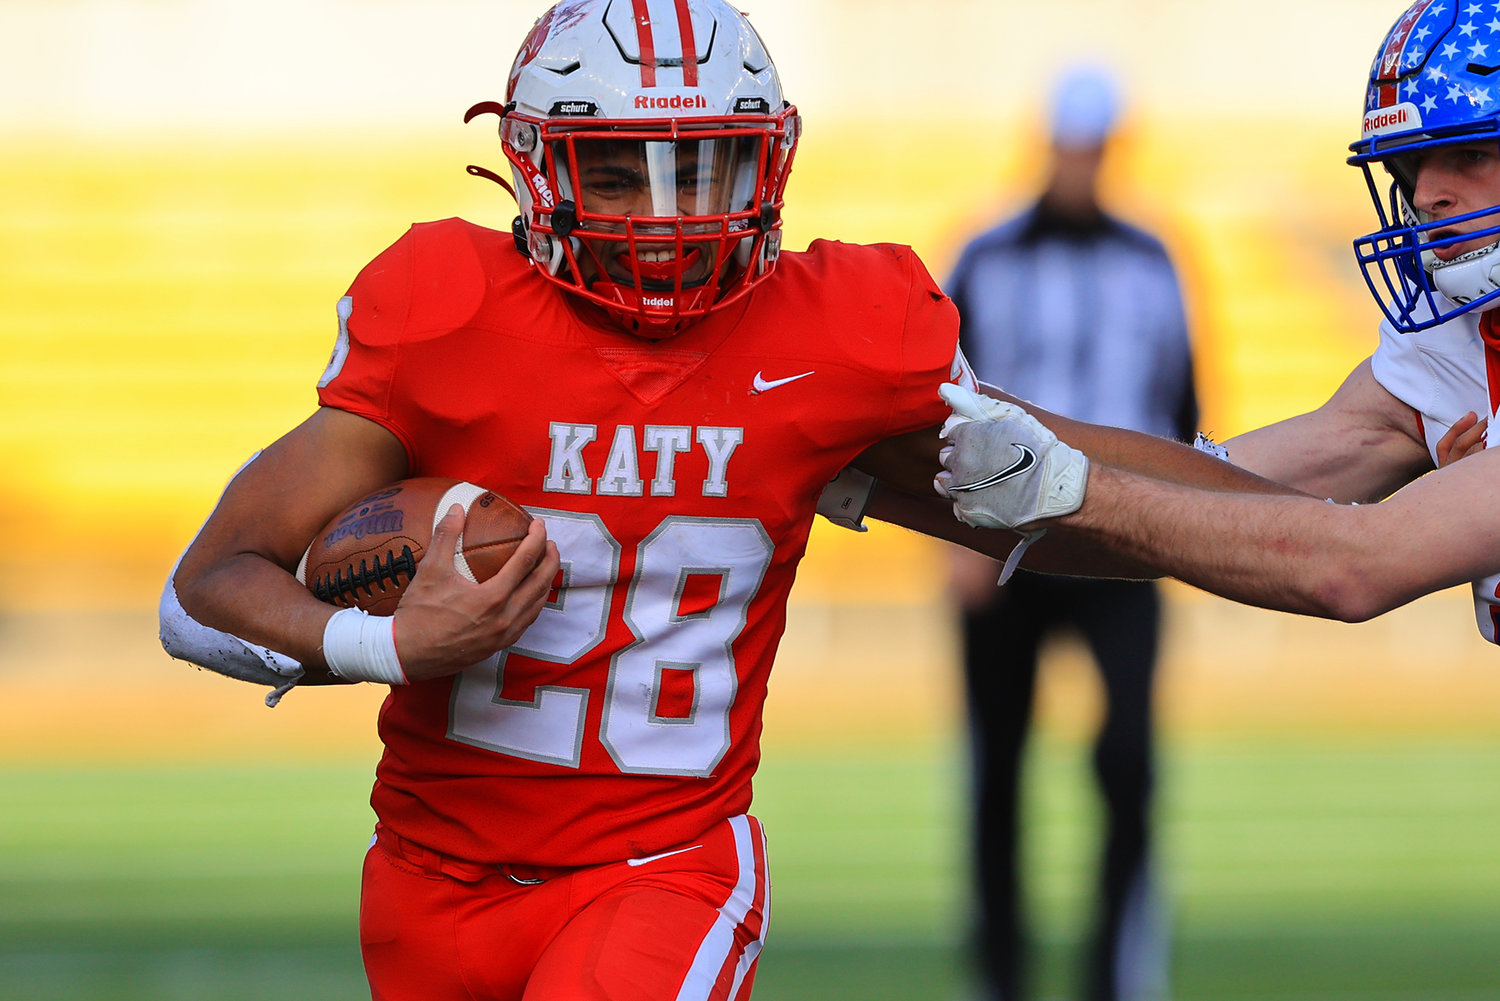 Katy High senior running back Jalen Davis was one of a few seniors that were called-up as freshman the last time the Tigers made it to the state semifinals in 2017, which they lost to Lake Travis. Now Davis and the rest of the senior class have earned themselves an opportunity to compete for a state title, the program’s first such chance since 2015.